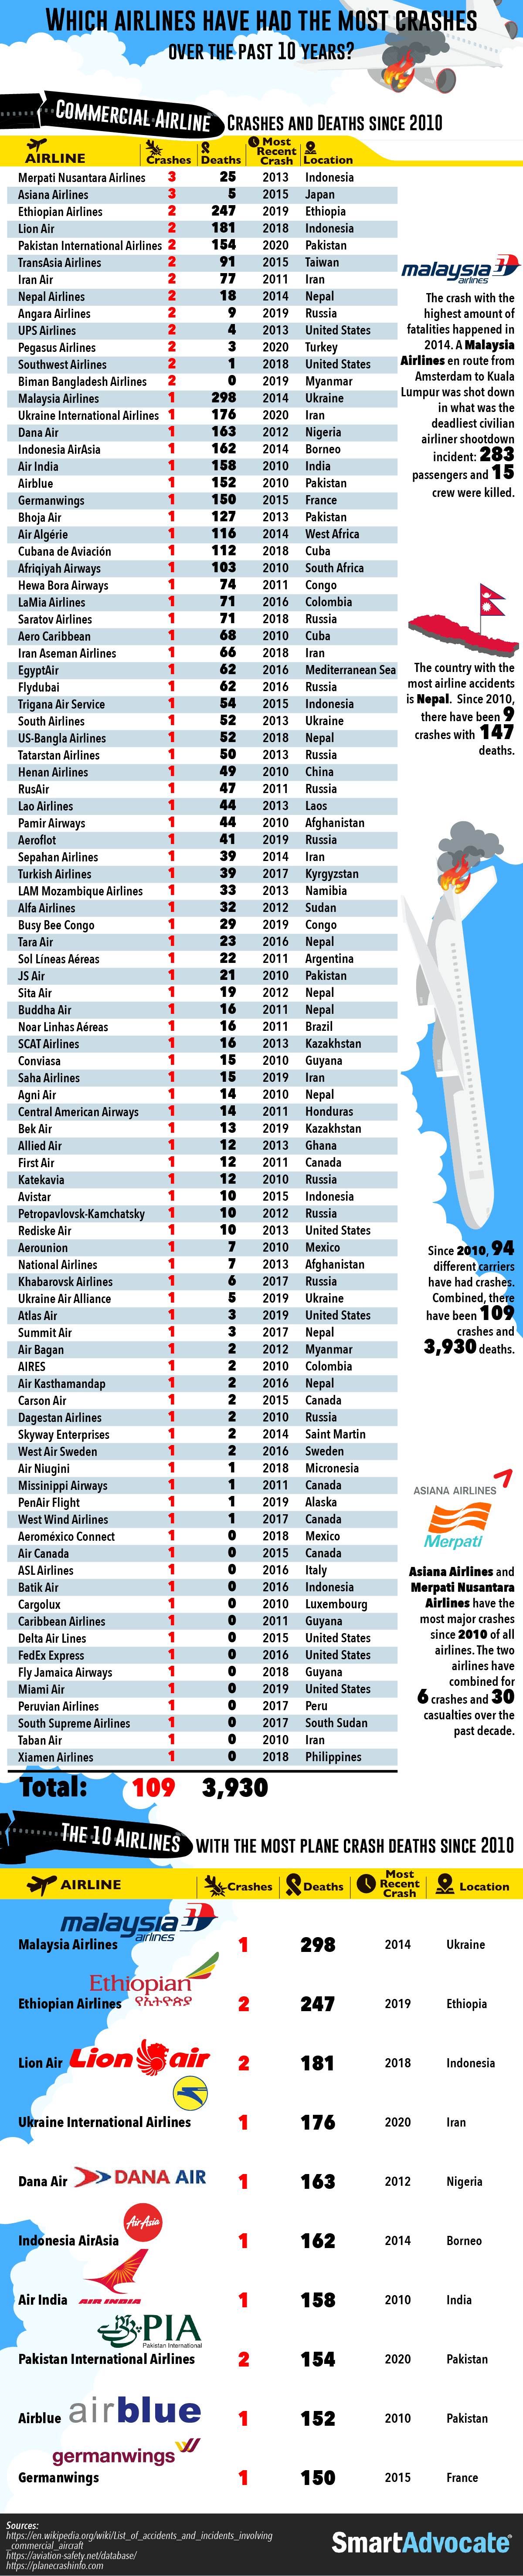 Which Airlines Have Had the Most Plane Crashes Since 2010